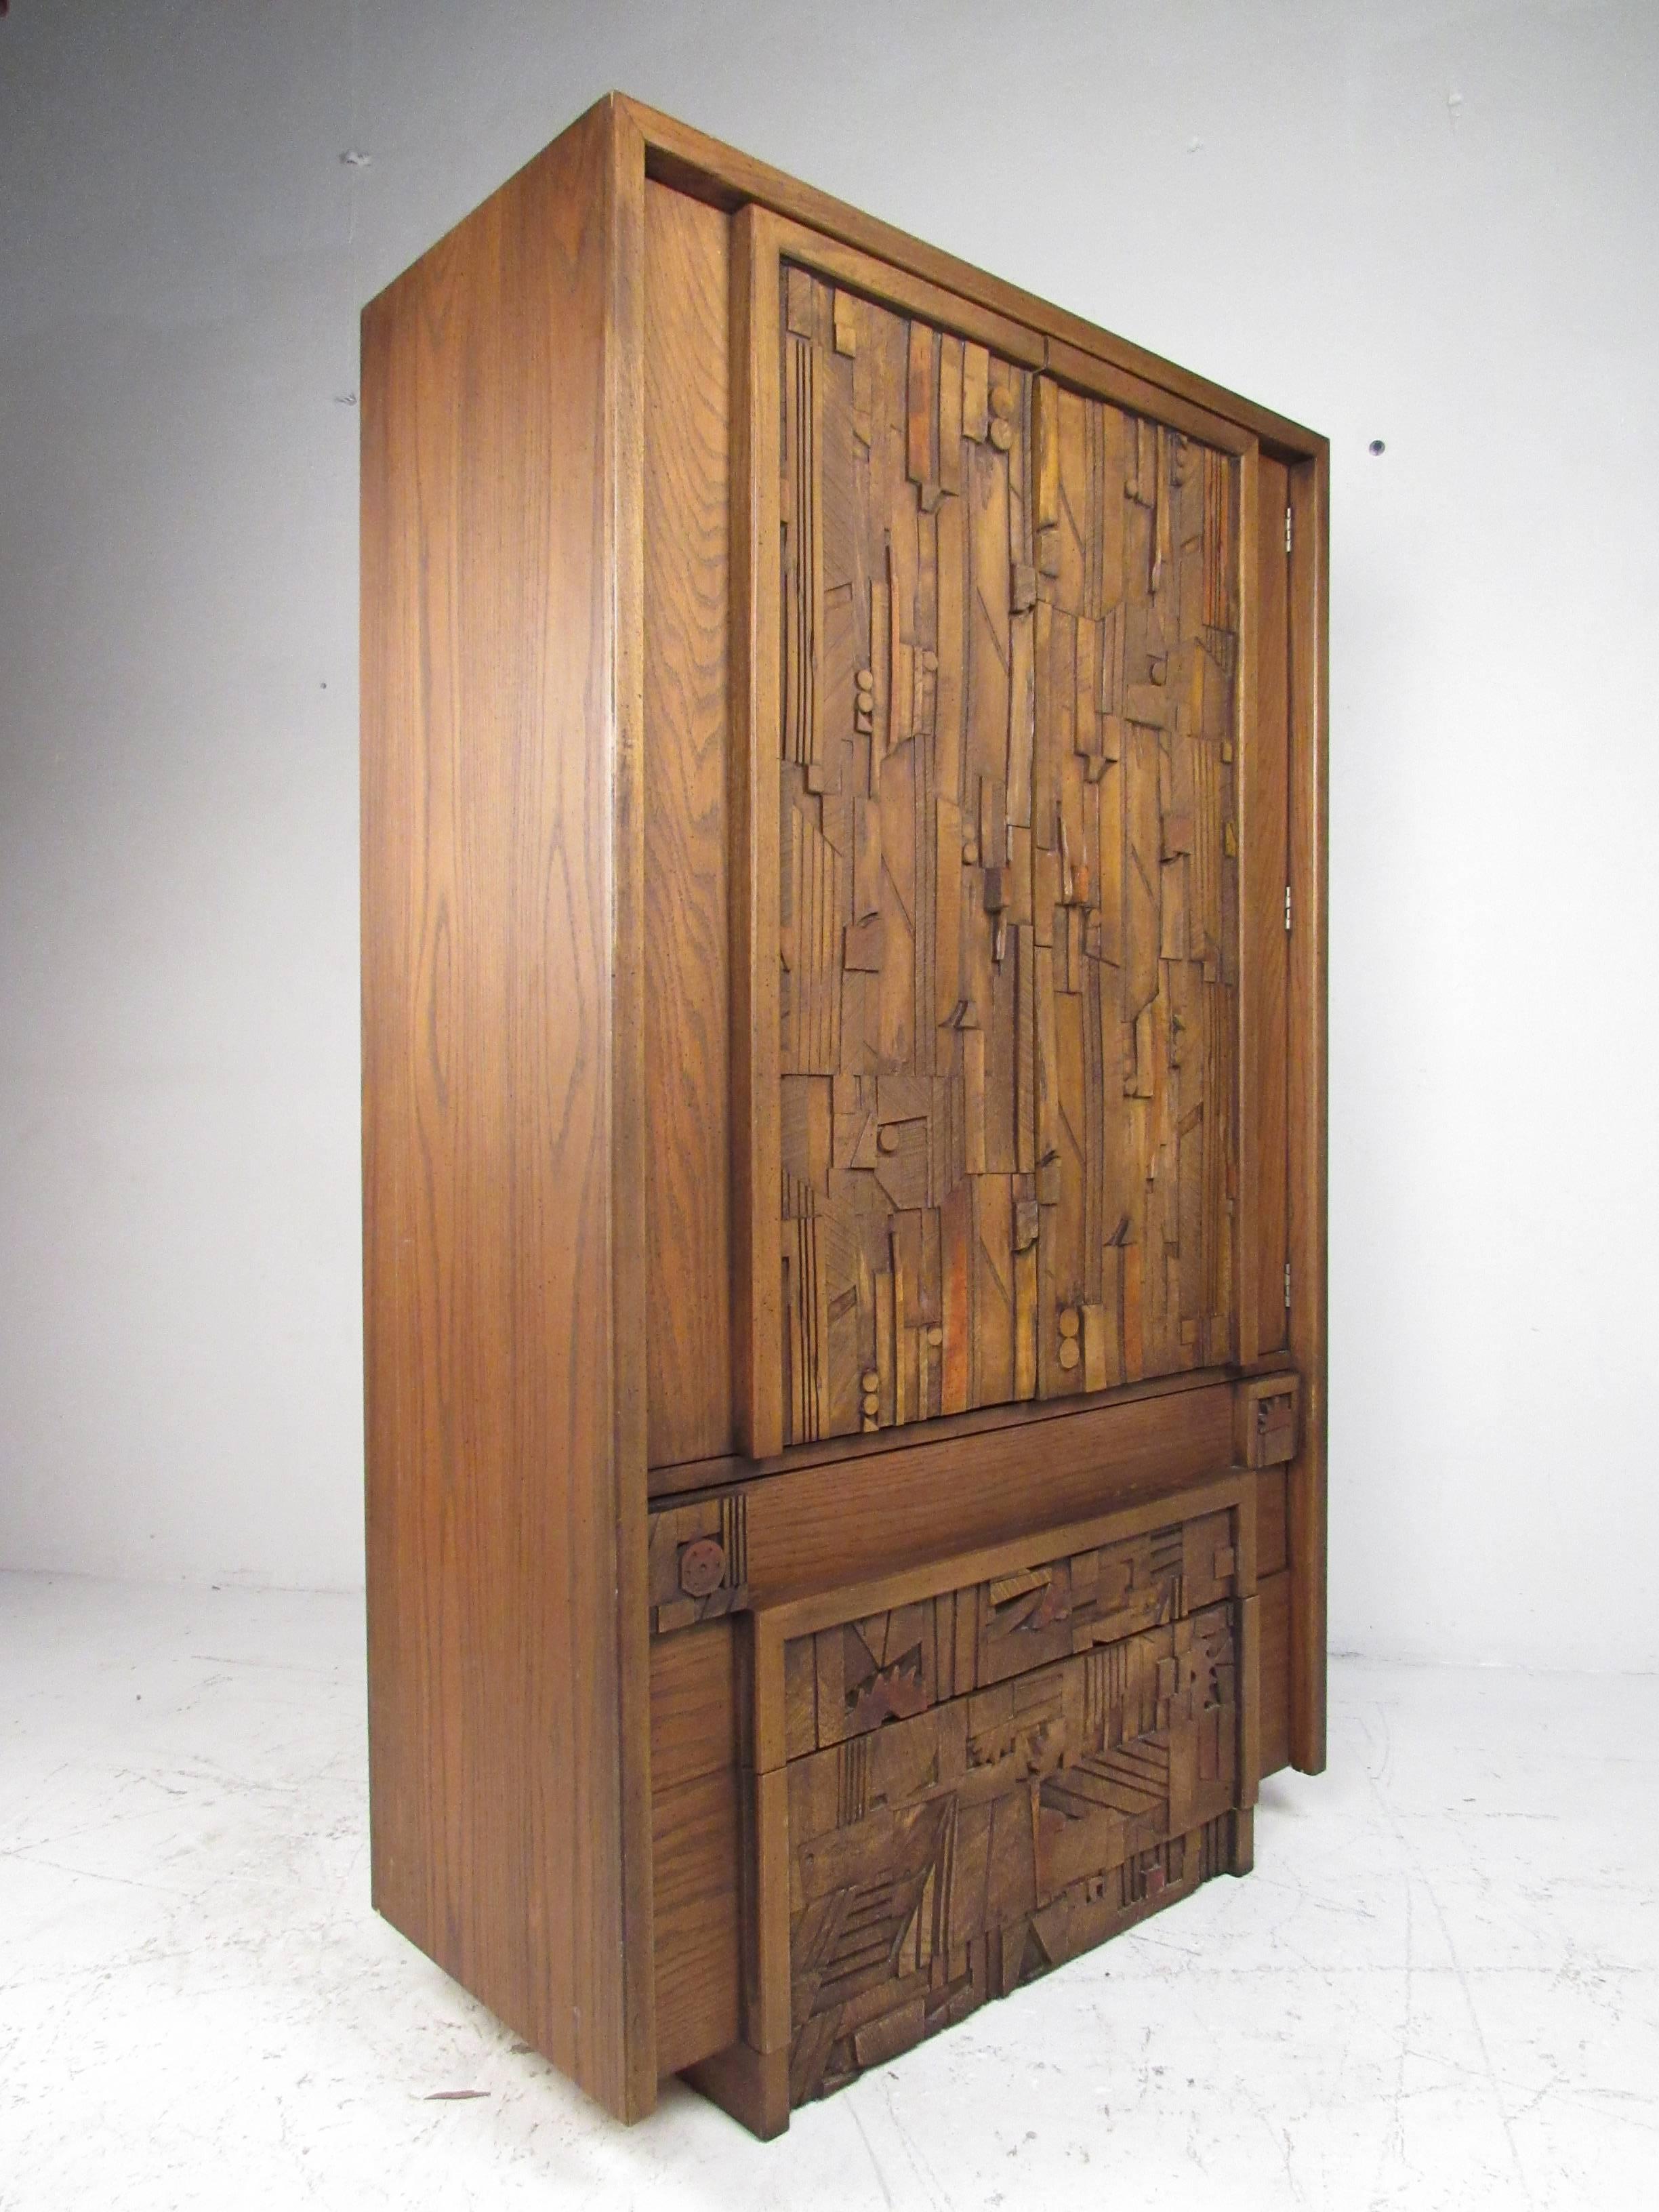 This gorgeous Mid-Century Modern wardrobe features a Brutalist front with exquisite detail. A sleek design with an abundance of storage space hidden behind two cabinet doors. This impressive case piece has four hefty drawers and a large compartment